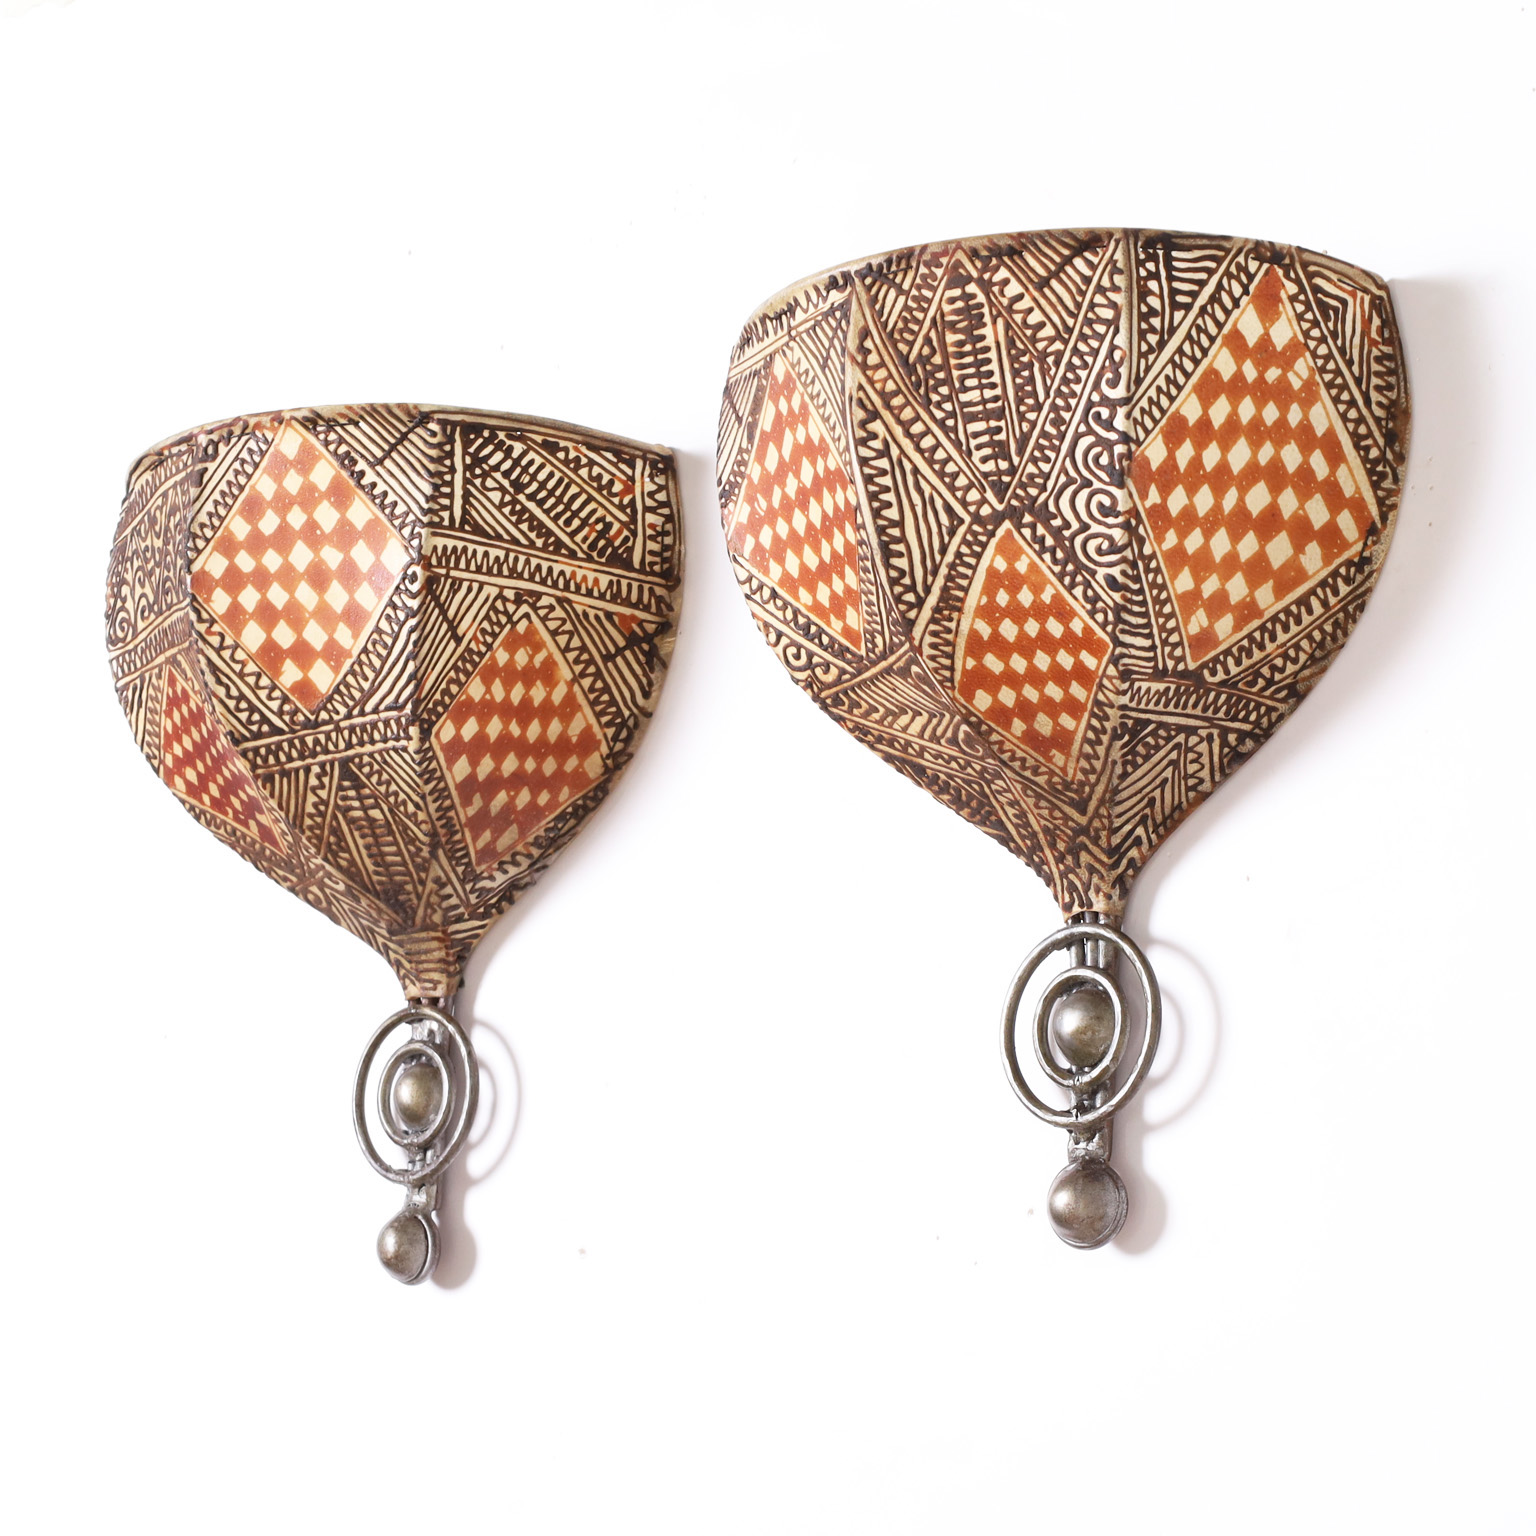 Vintage Pair of Moroccan Painted Parchment Wall Sconces